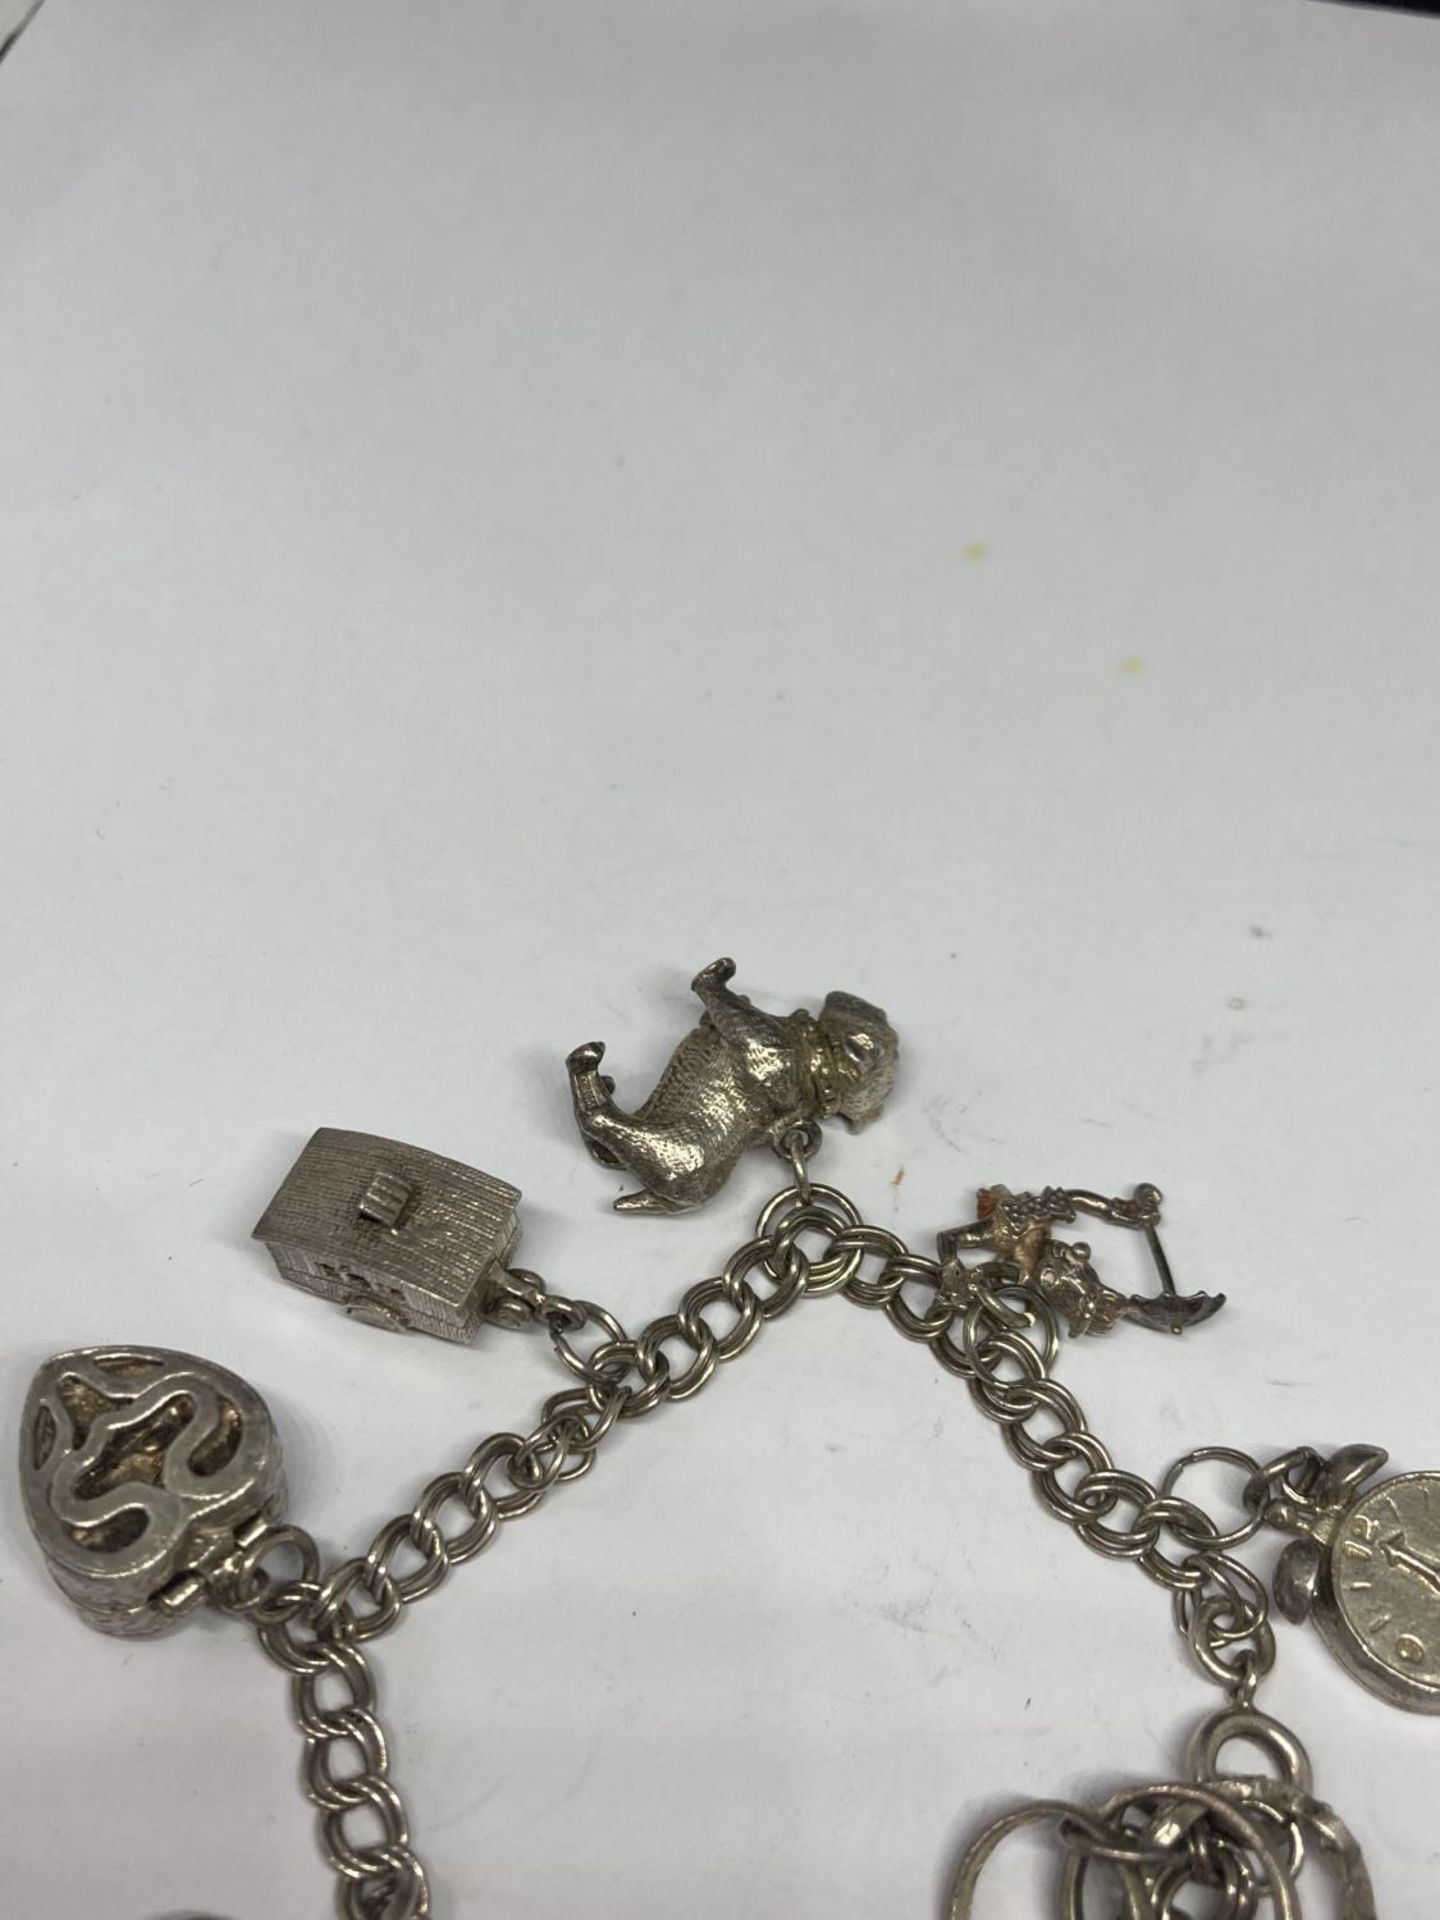 A SILVER CHARM BRACELET WITH TEN CHARMS - Image 4 of 4